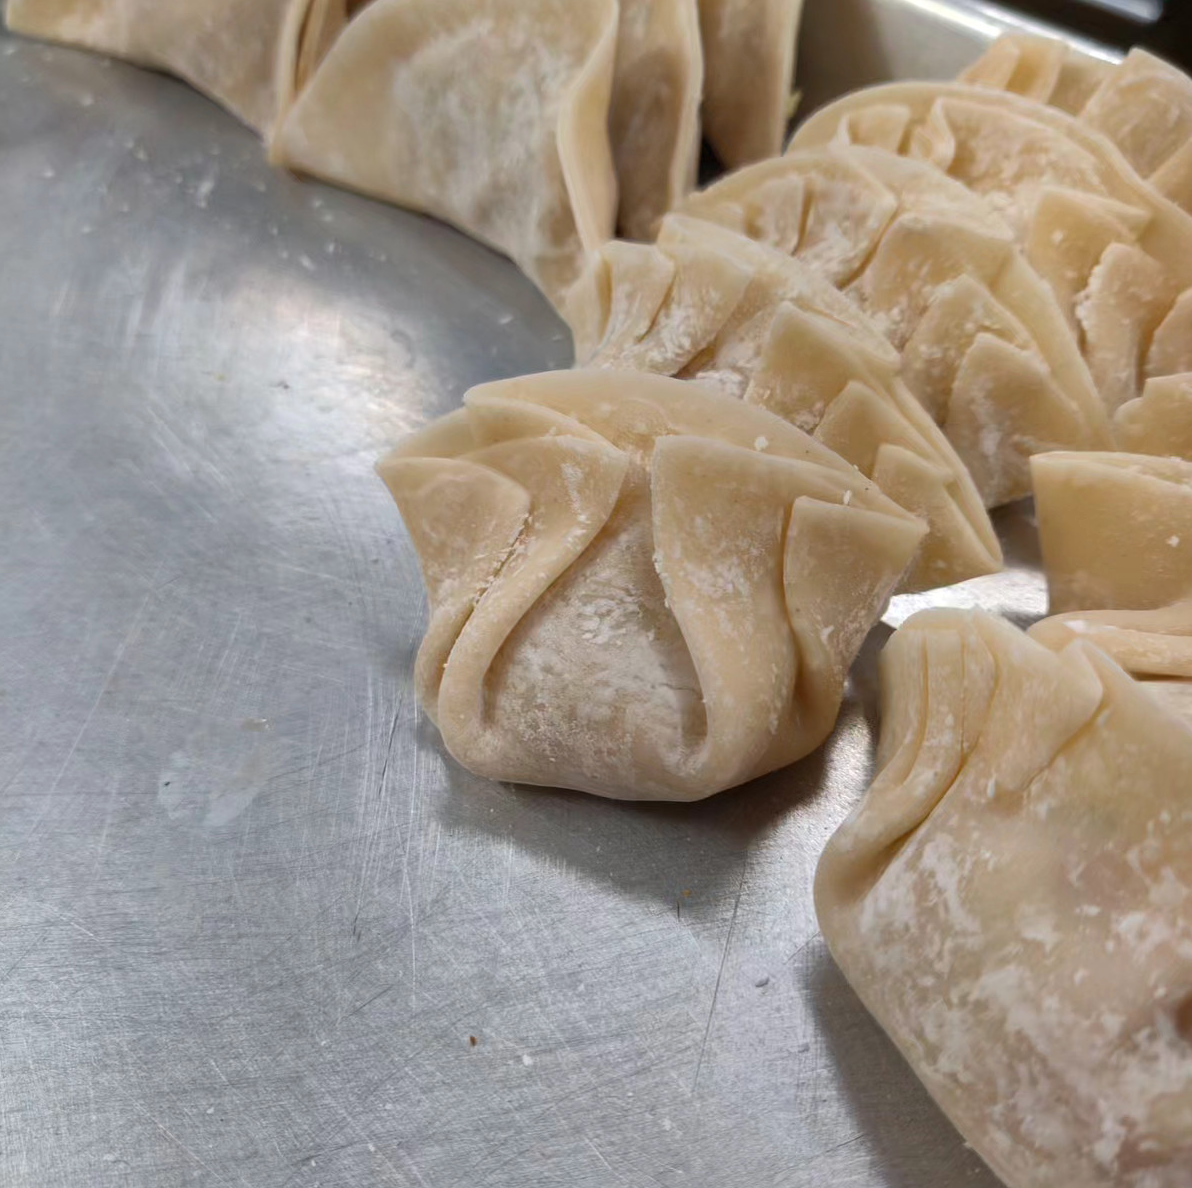 A bunch of dumplings are sitting on top of a metal tray.